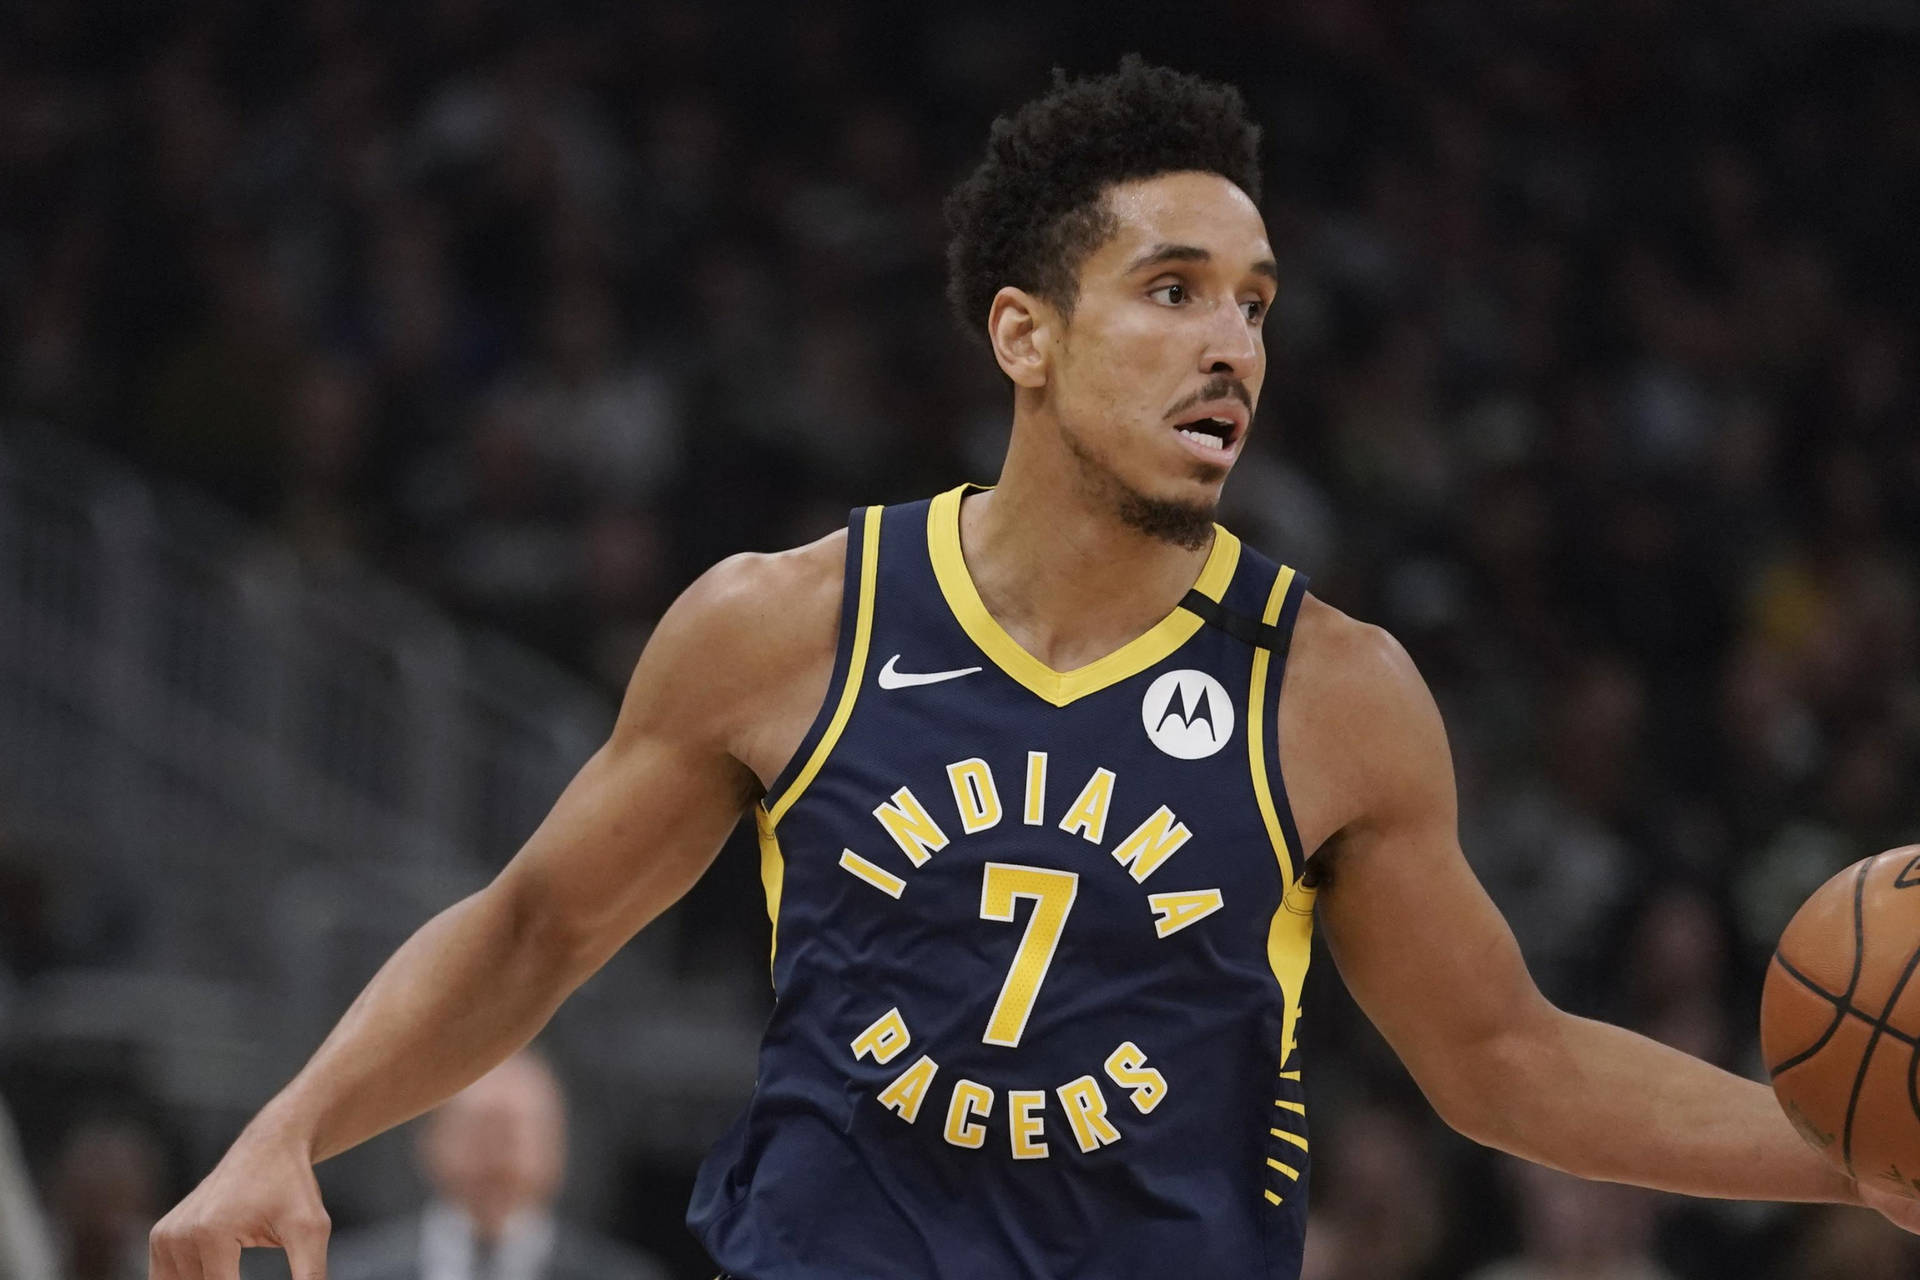 Malcolm Brogdon i Pacers' Jersey Wallpaper